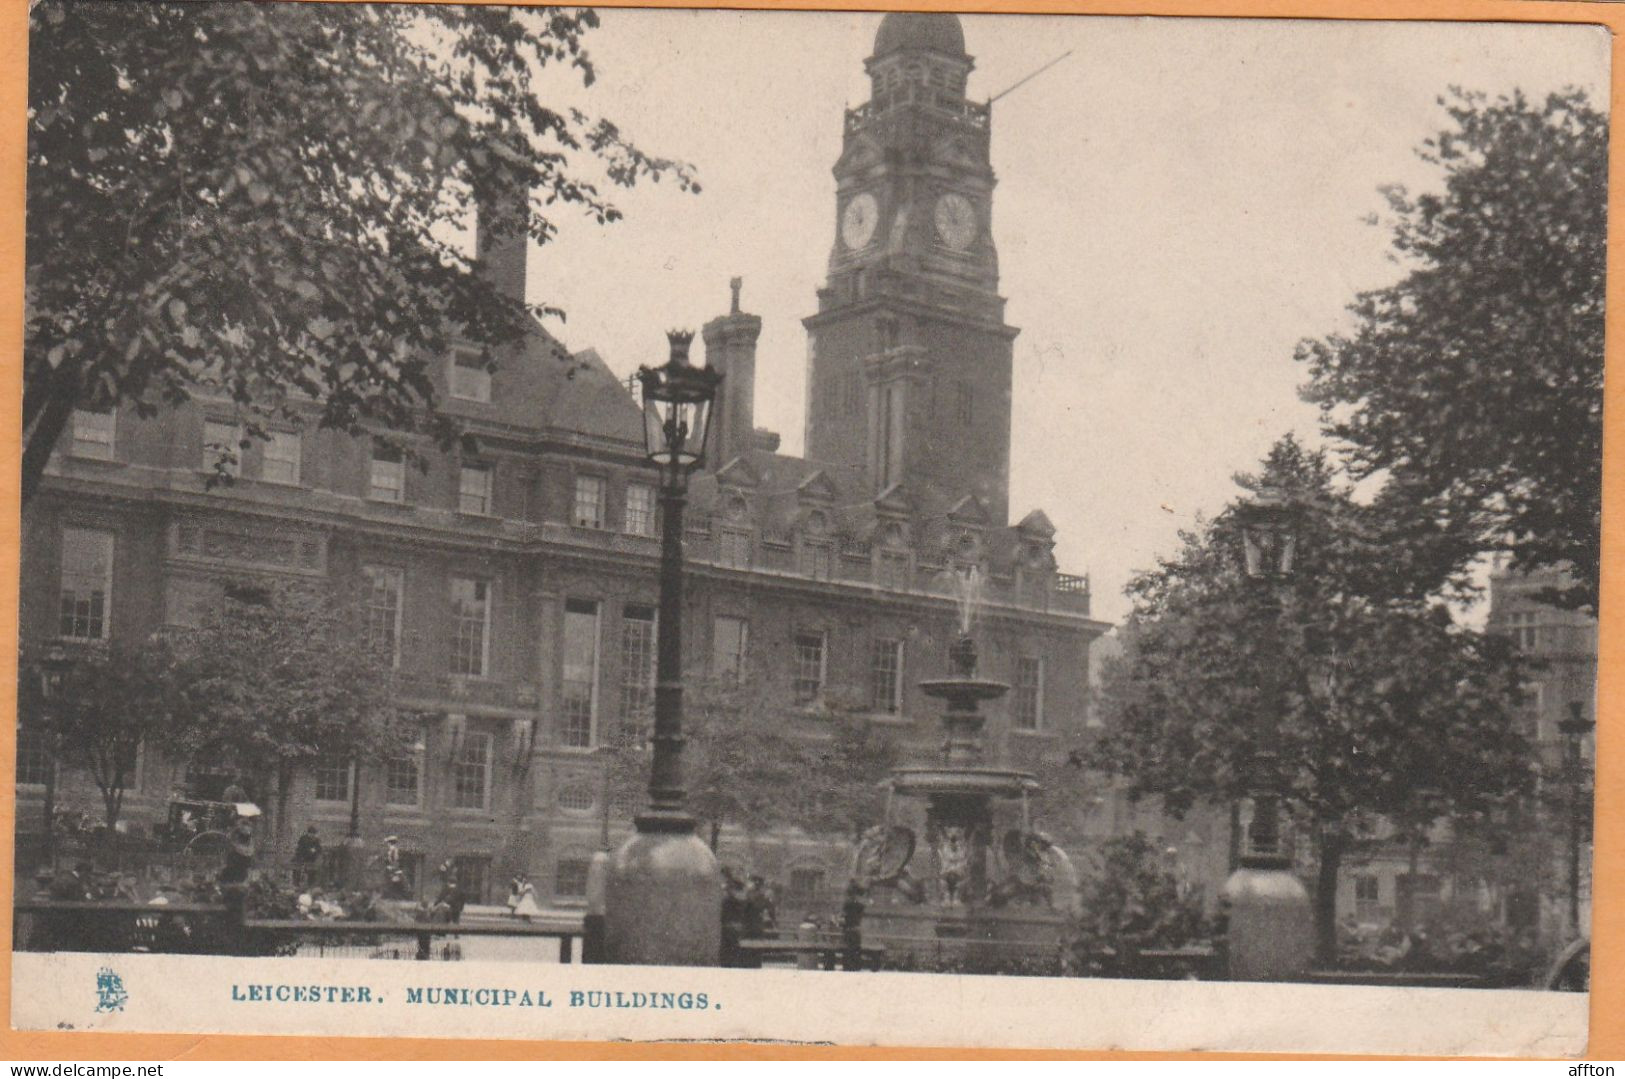 Leicester UK 1904 Postcard - Leicester